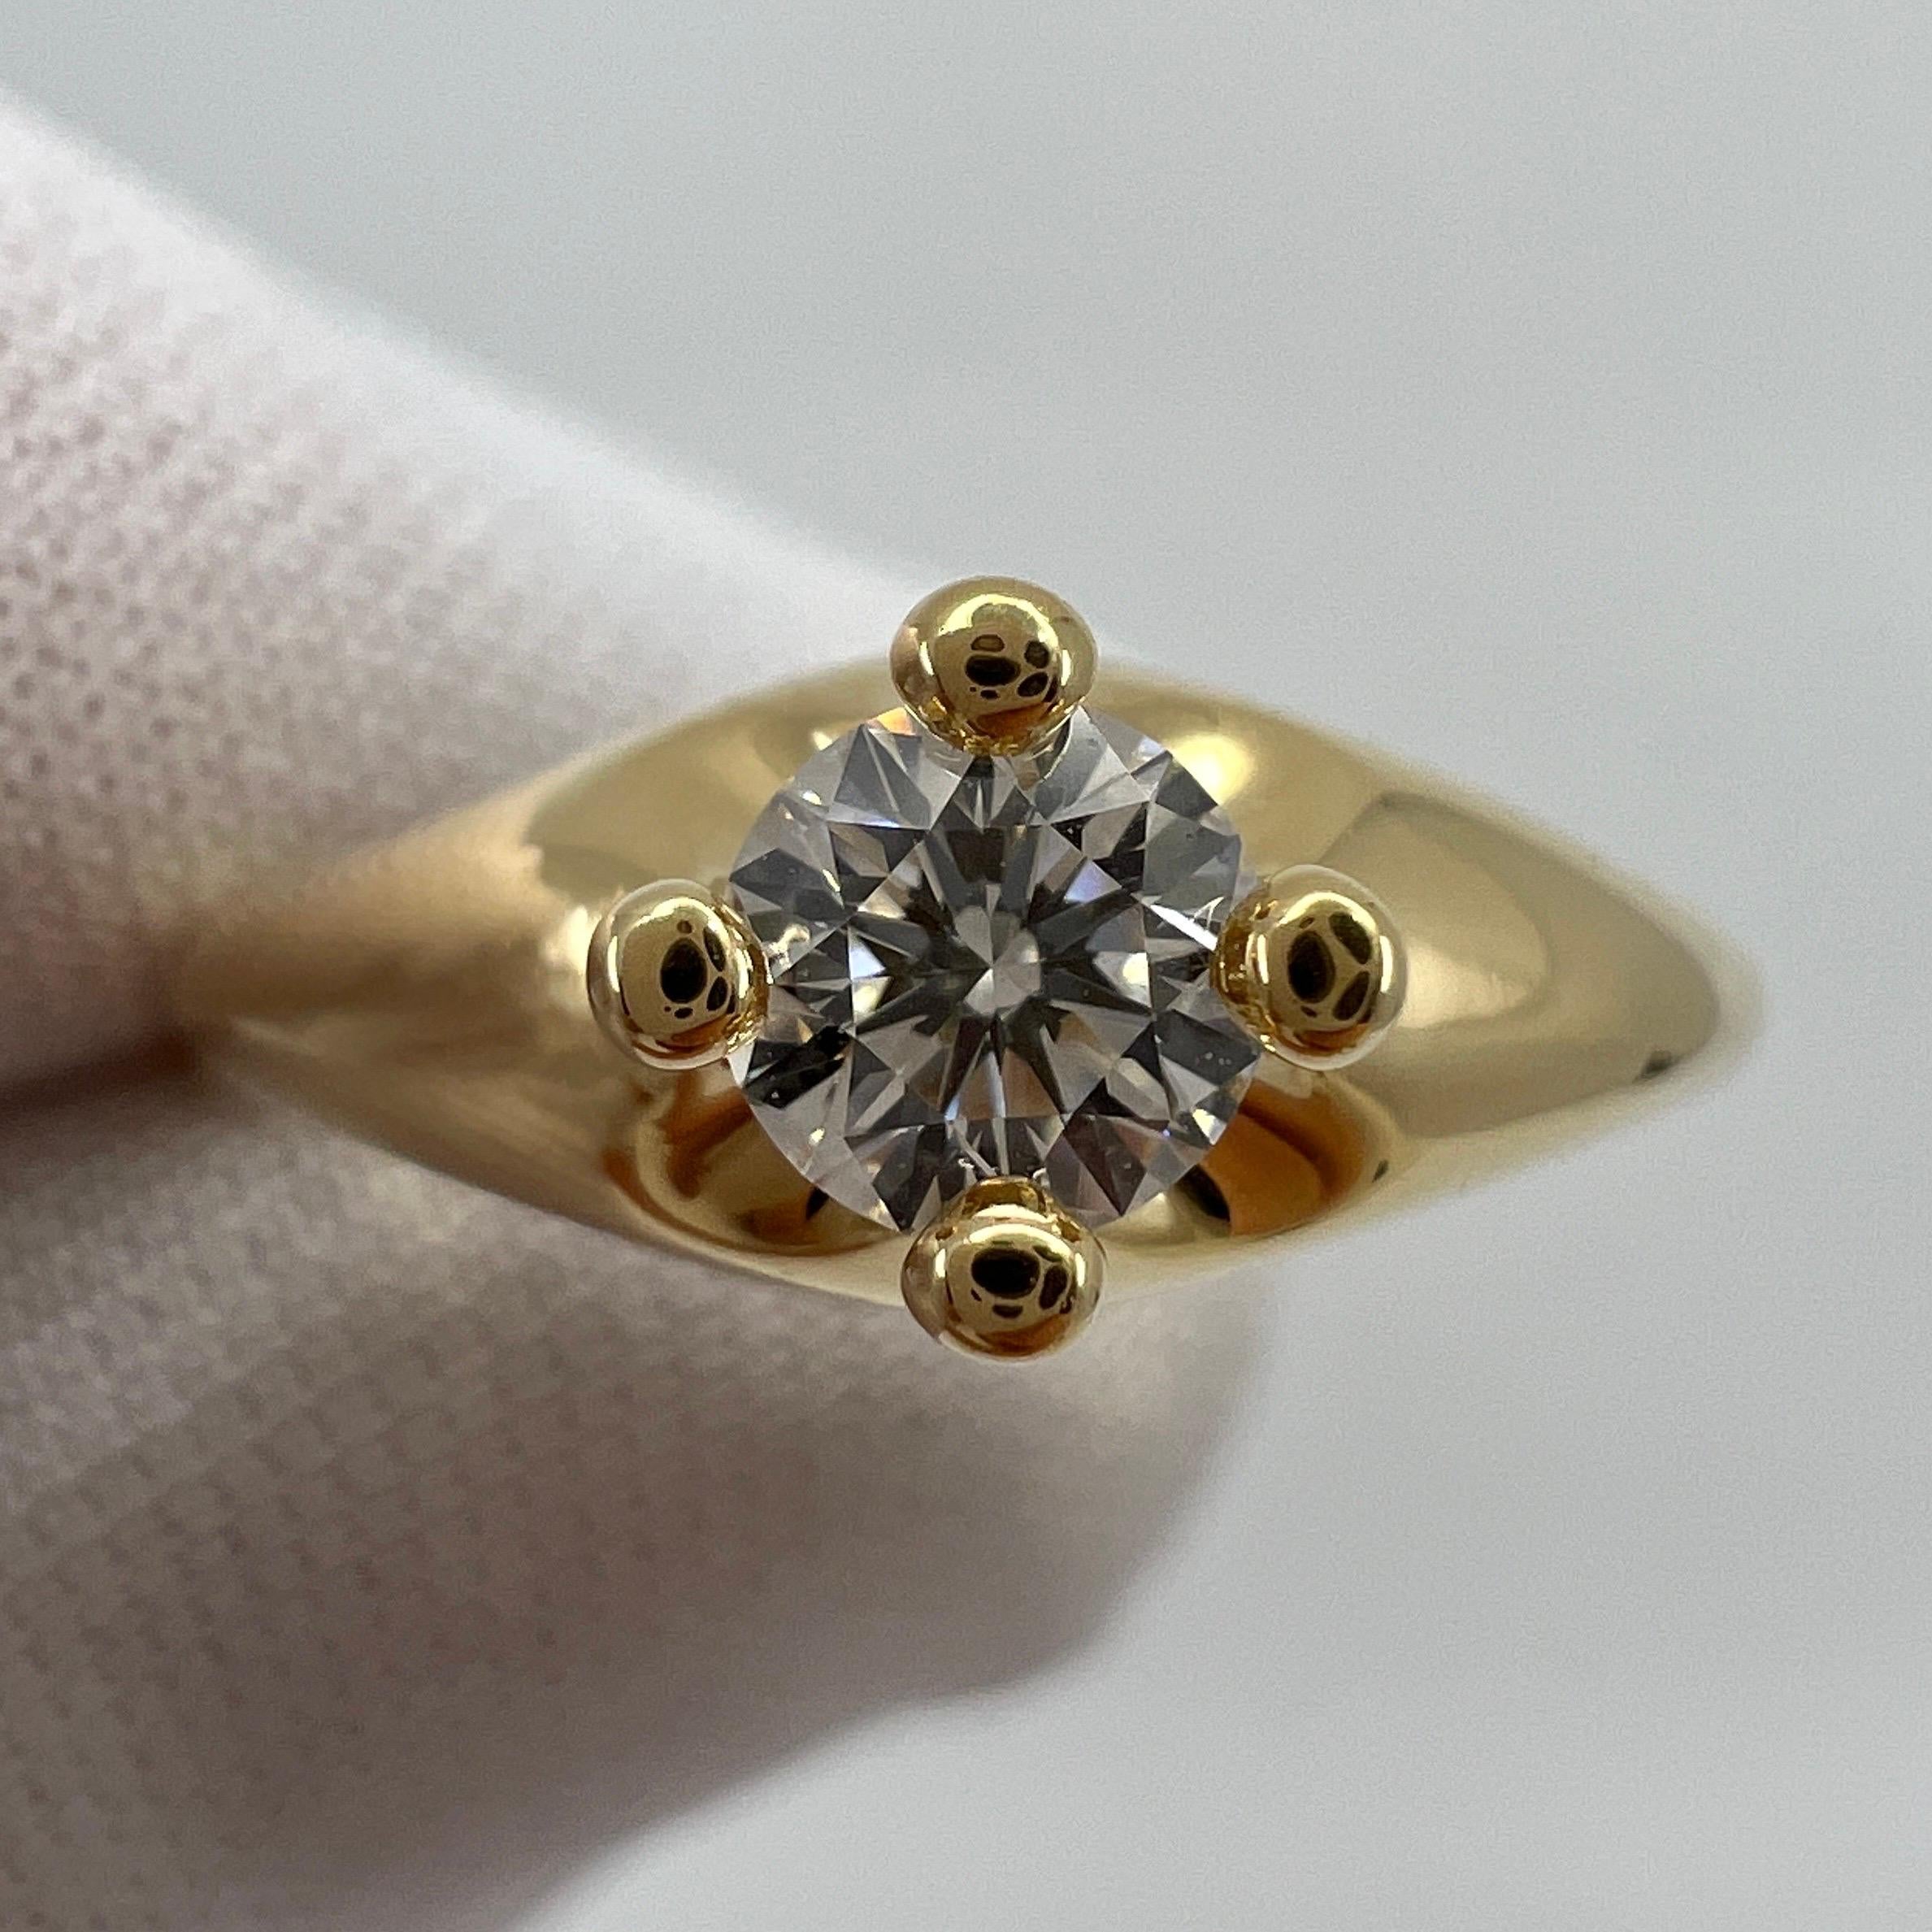 Bvlgari 18k Yellow Gold Diamond Round Cut Solitaire Band Ring.

A classic Bvlgari solitaire diamond ring set with a single 0.27 carat diamond. Measuring 4.2mm.
Jewellery houses like Bvlgari only use the finest diamonds and gemstones in their